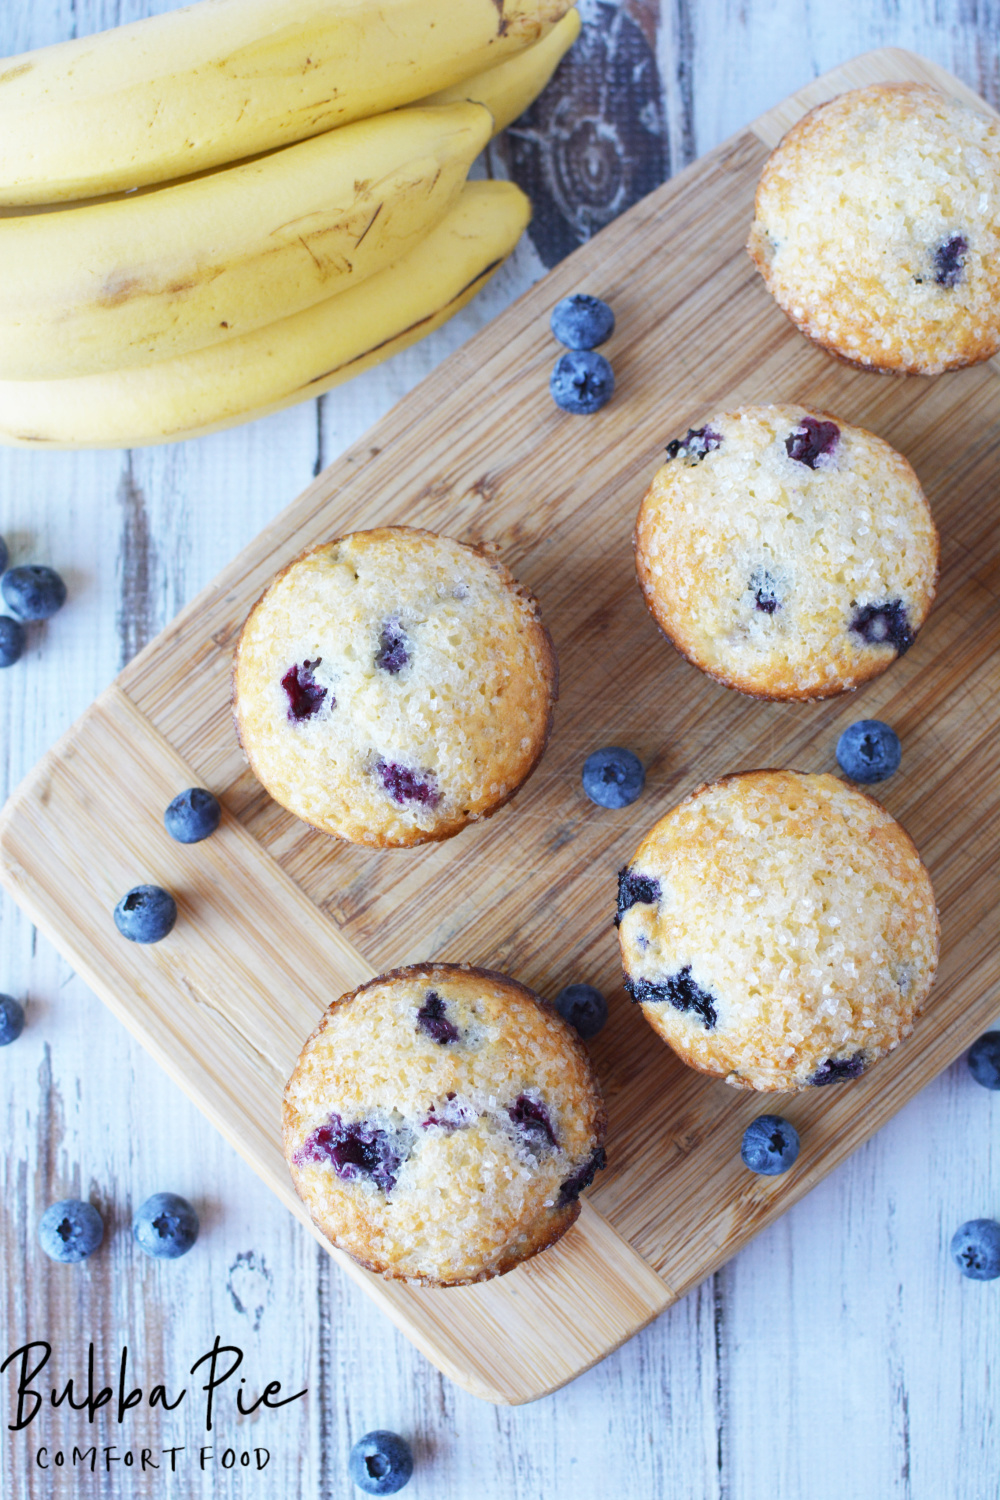 banana blueberry muffins the perfect breakfast treat